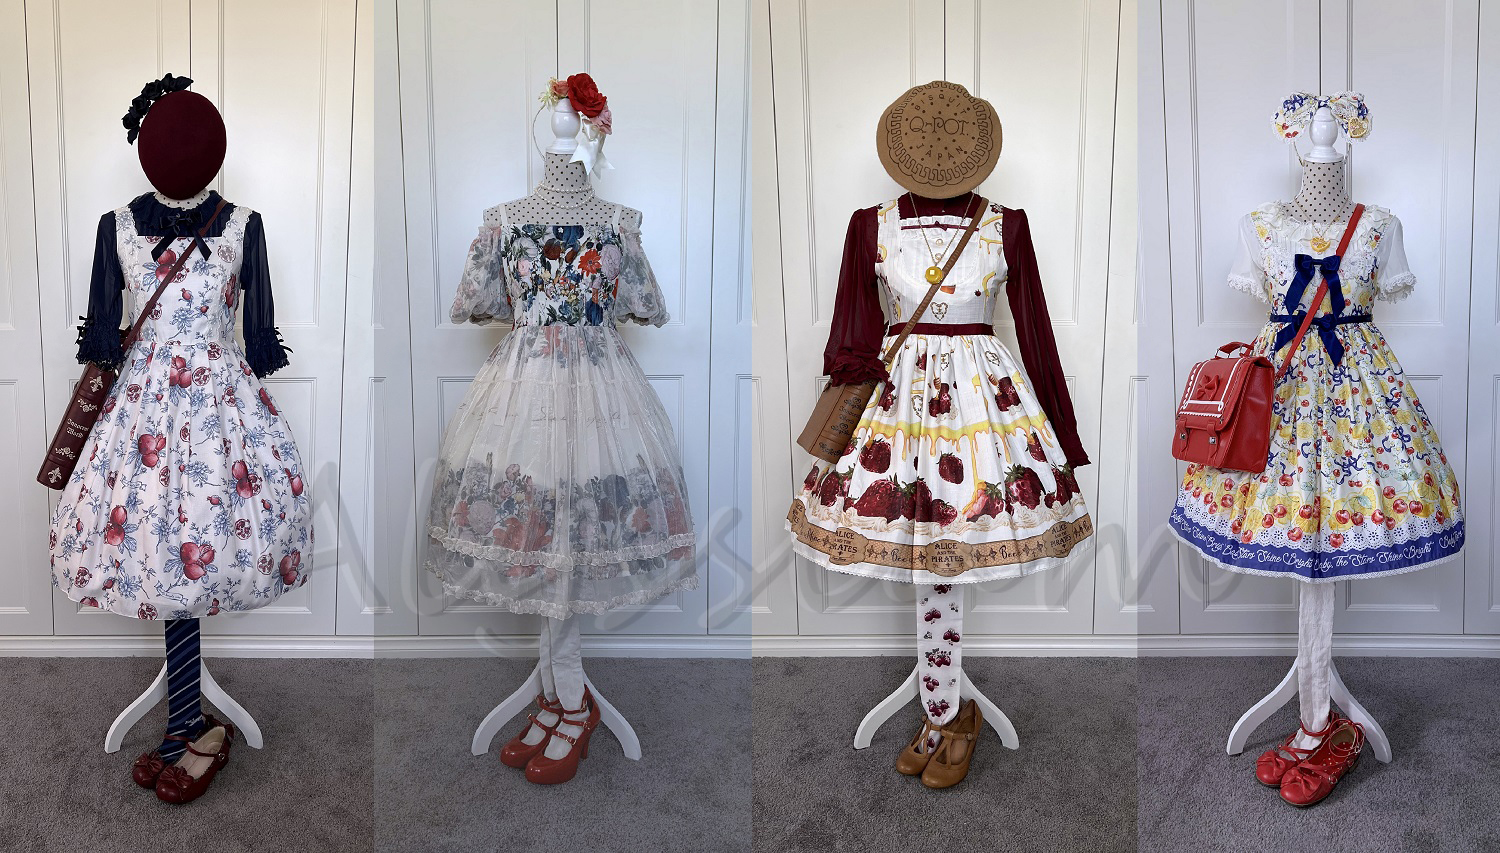 Lief Strawberry Ribbon Series Lace Collar OP - One Piece - Lace Market:  Lolita Fashion Sales